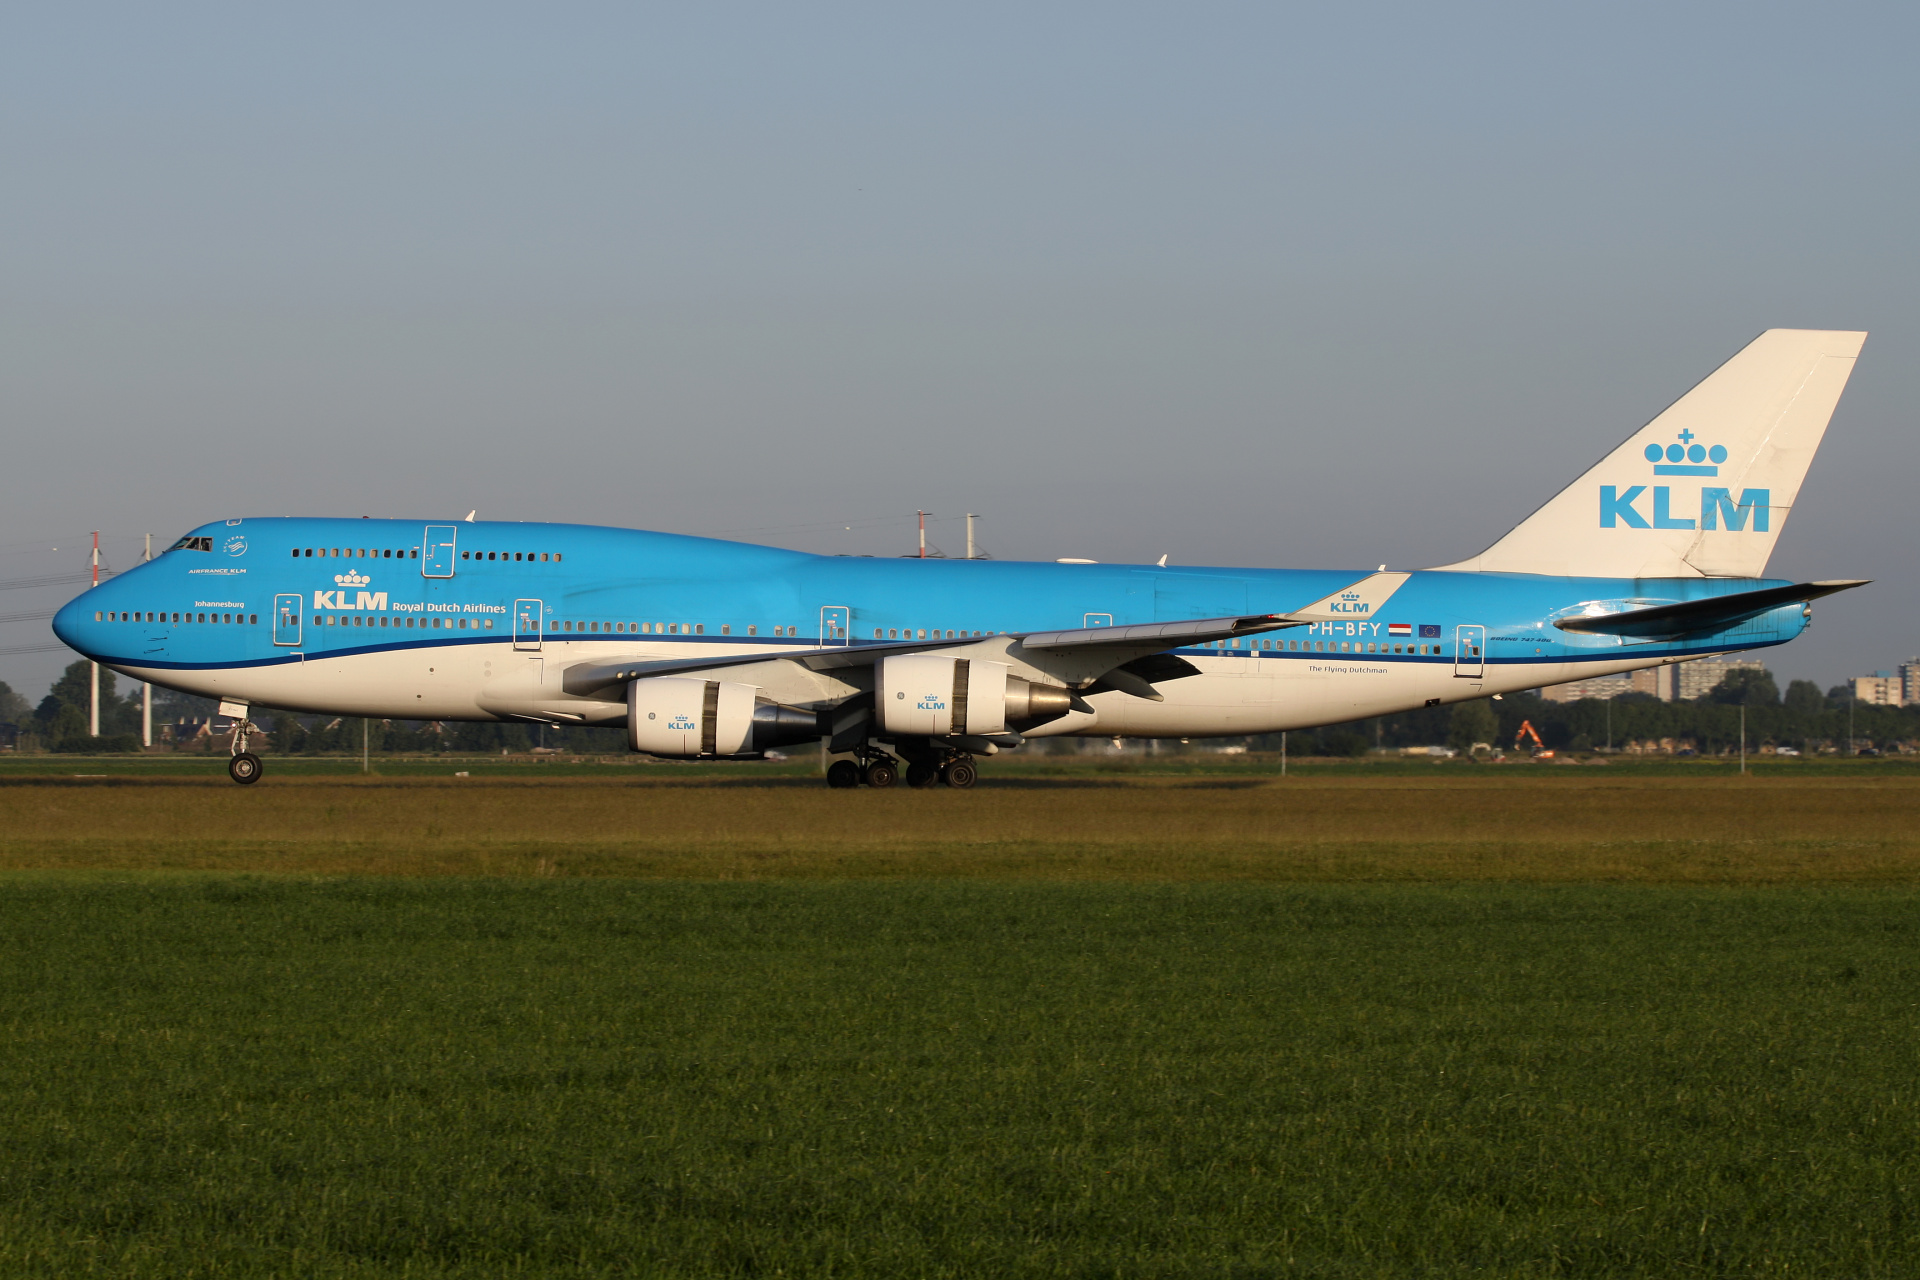 400M, PH-BFY, KLM Royal Dutch Airlines (Aircraft » Schiphol Spotting » Boeing 747-400)